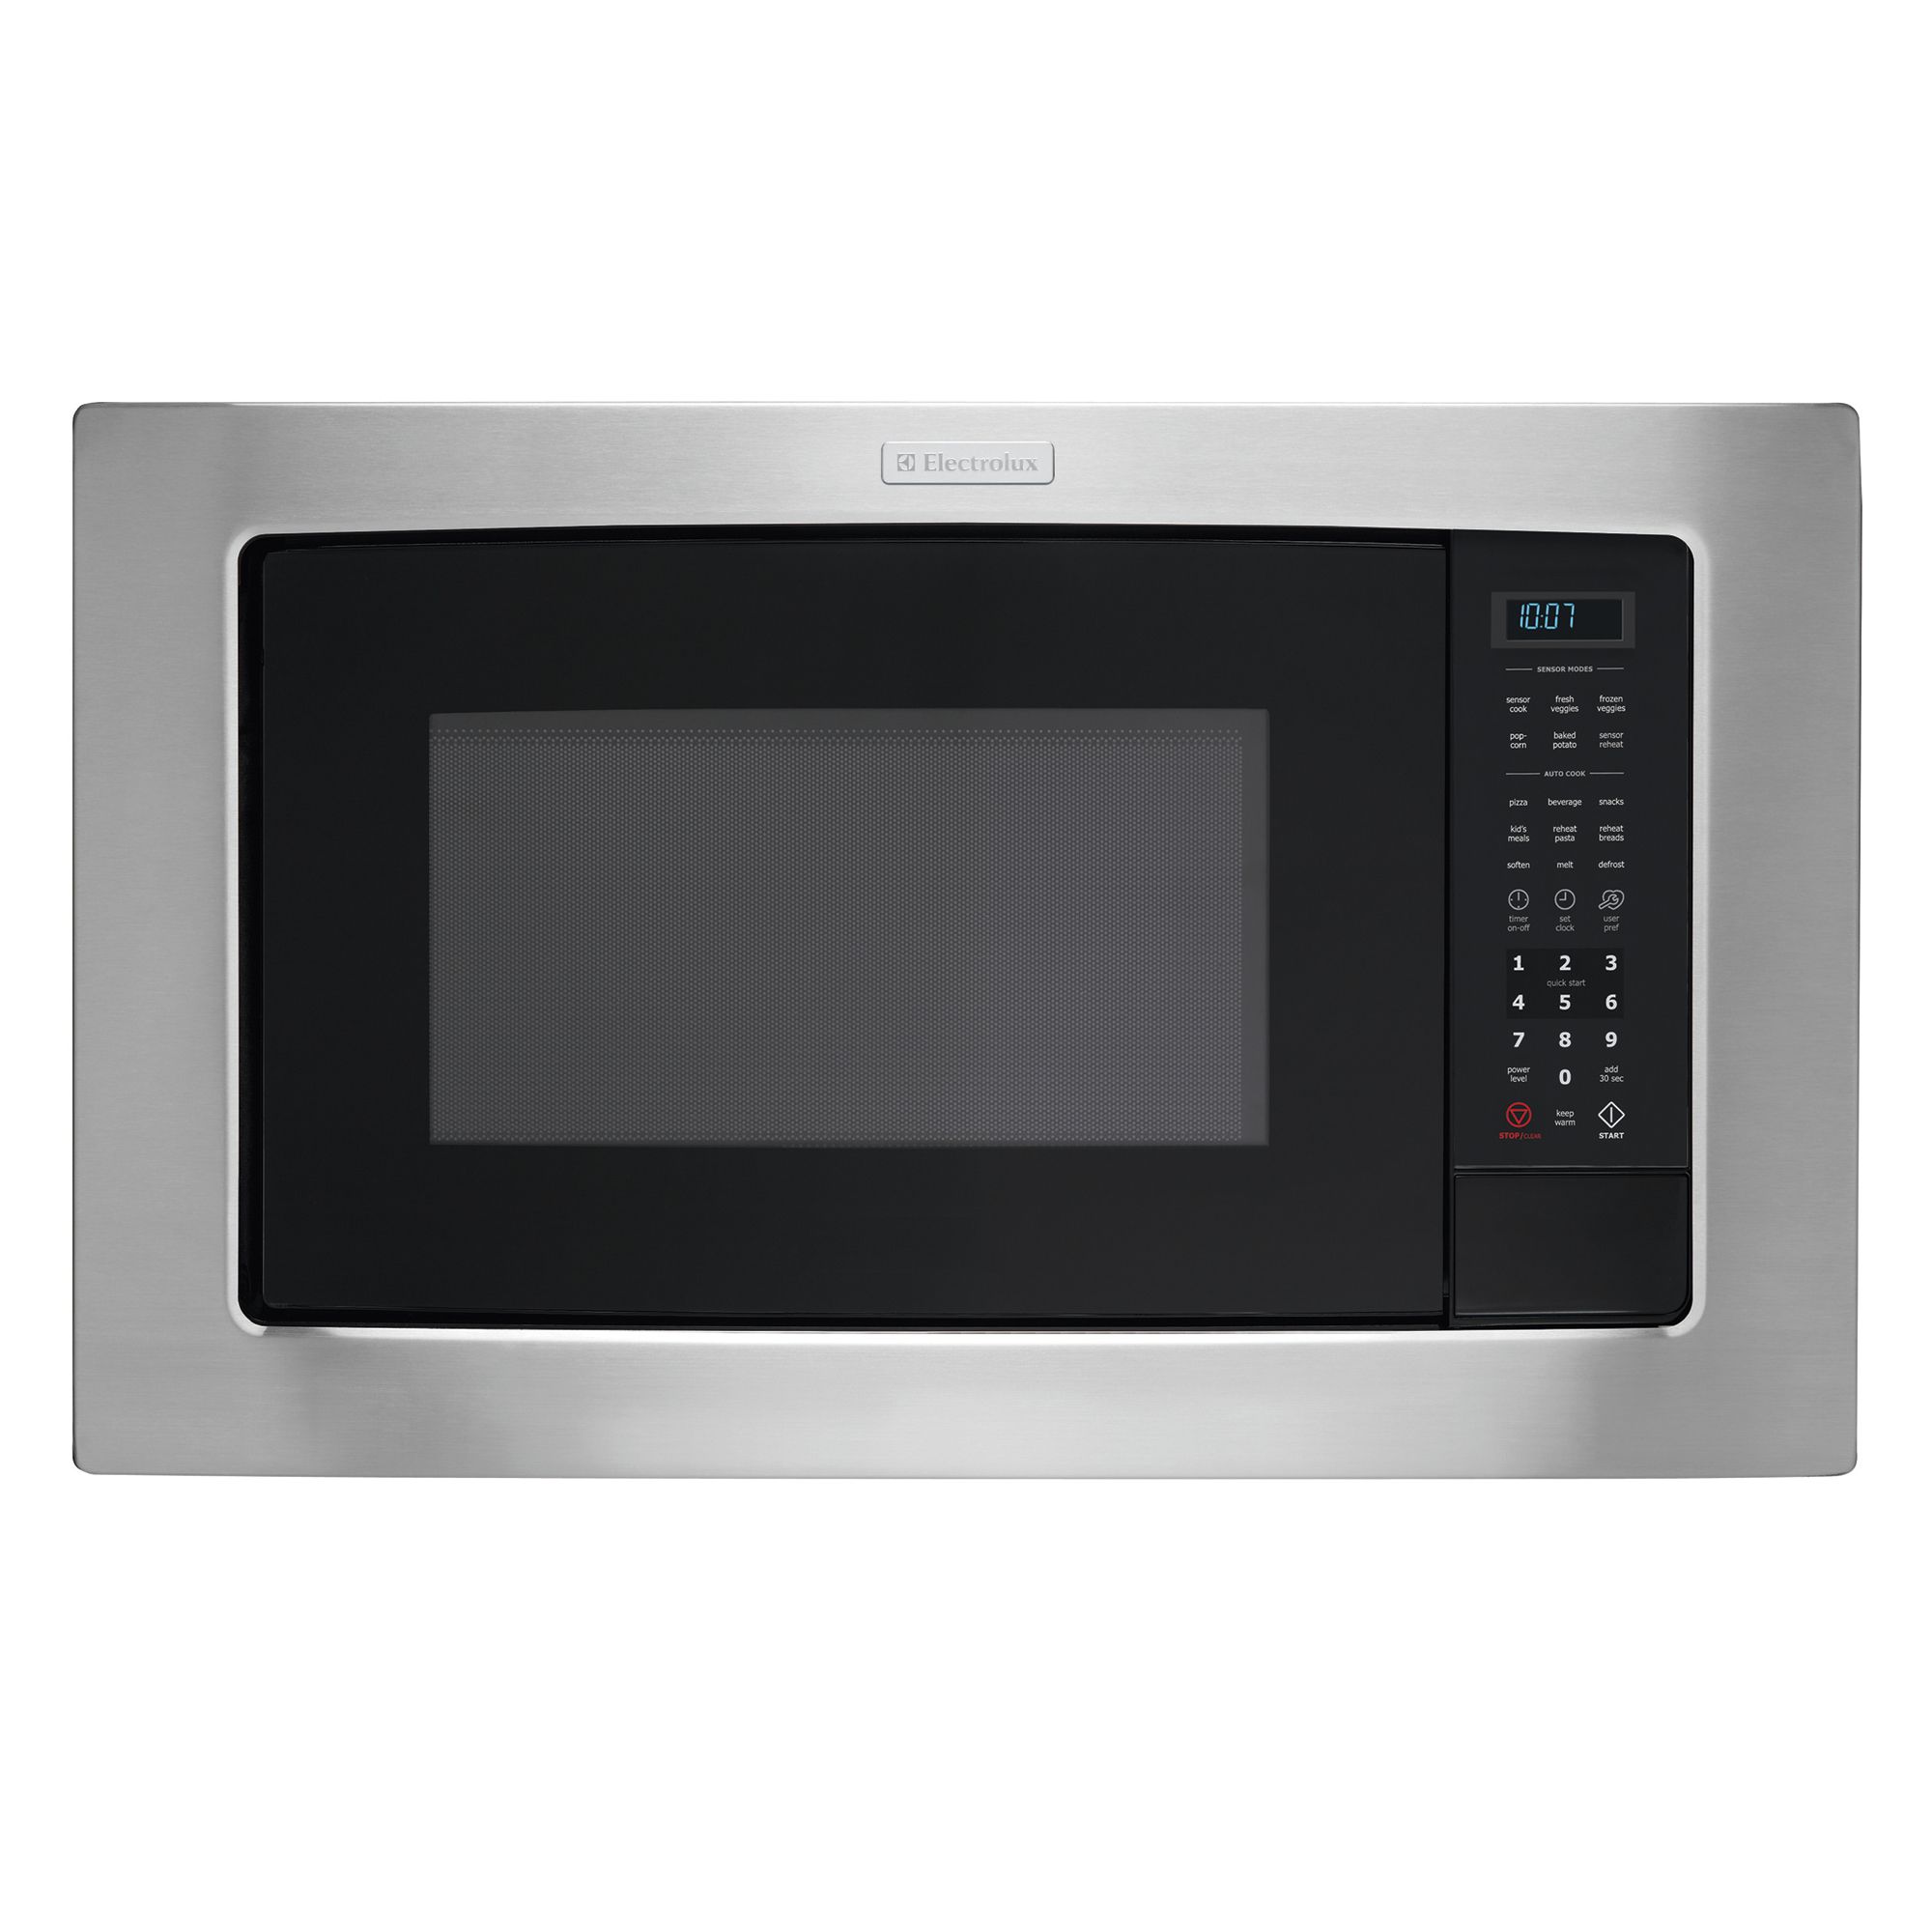 Electrolux EI24MO45IB 30" 2.0 cu. ft. Built-In Microwave Oven Black